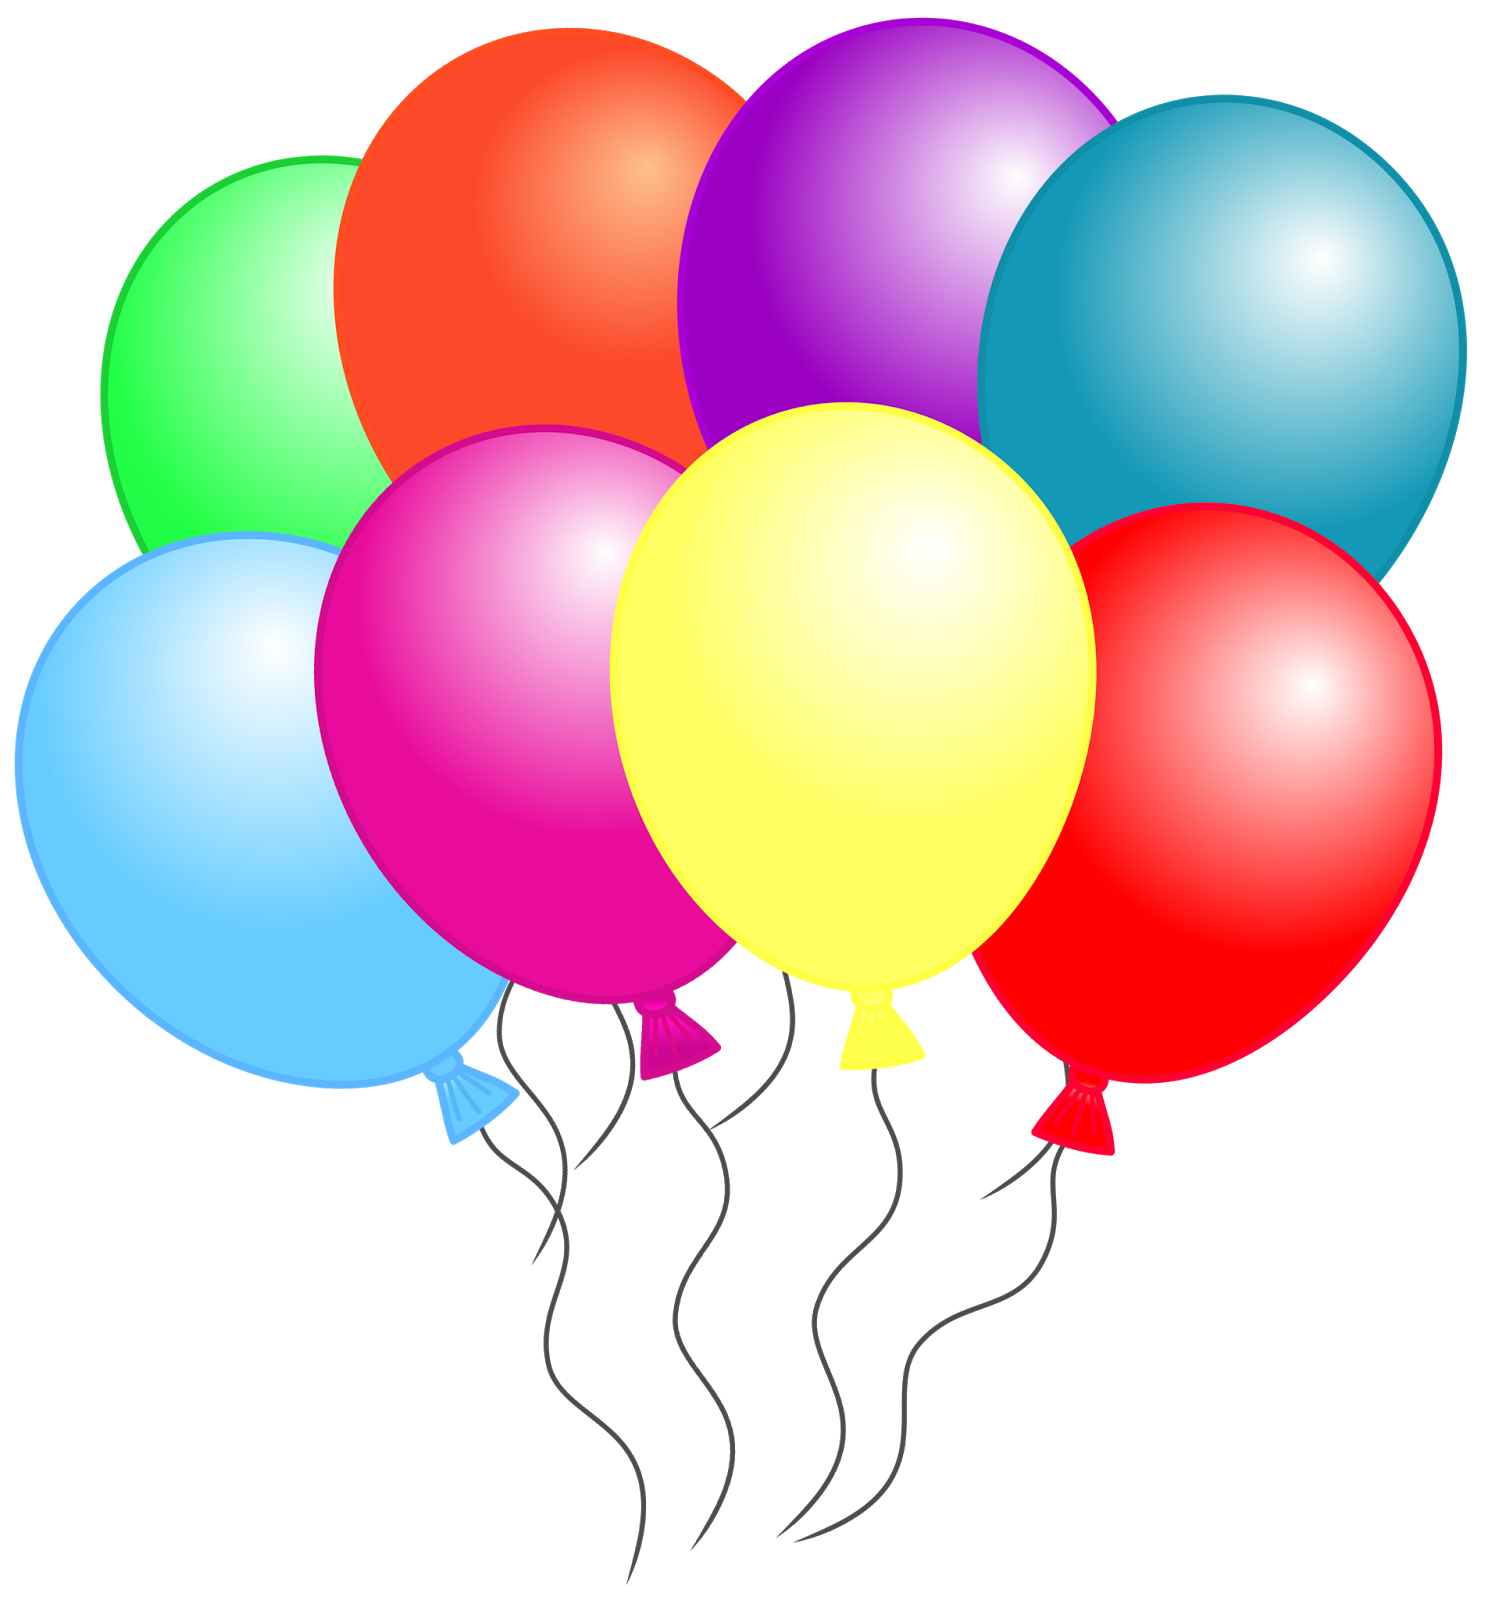 Fireworks clipart balloon. That can be downloaded